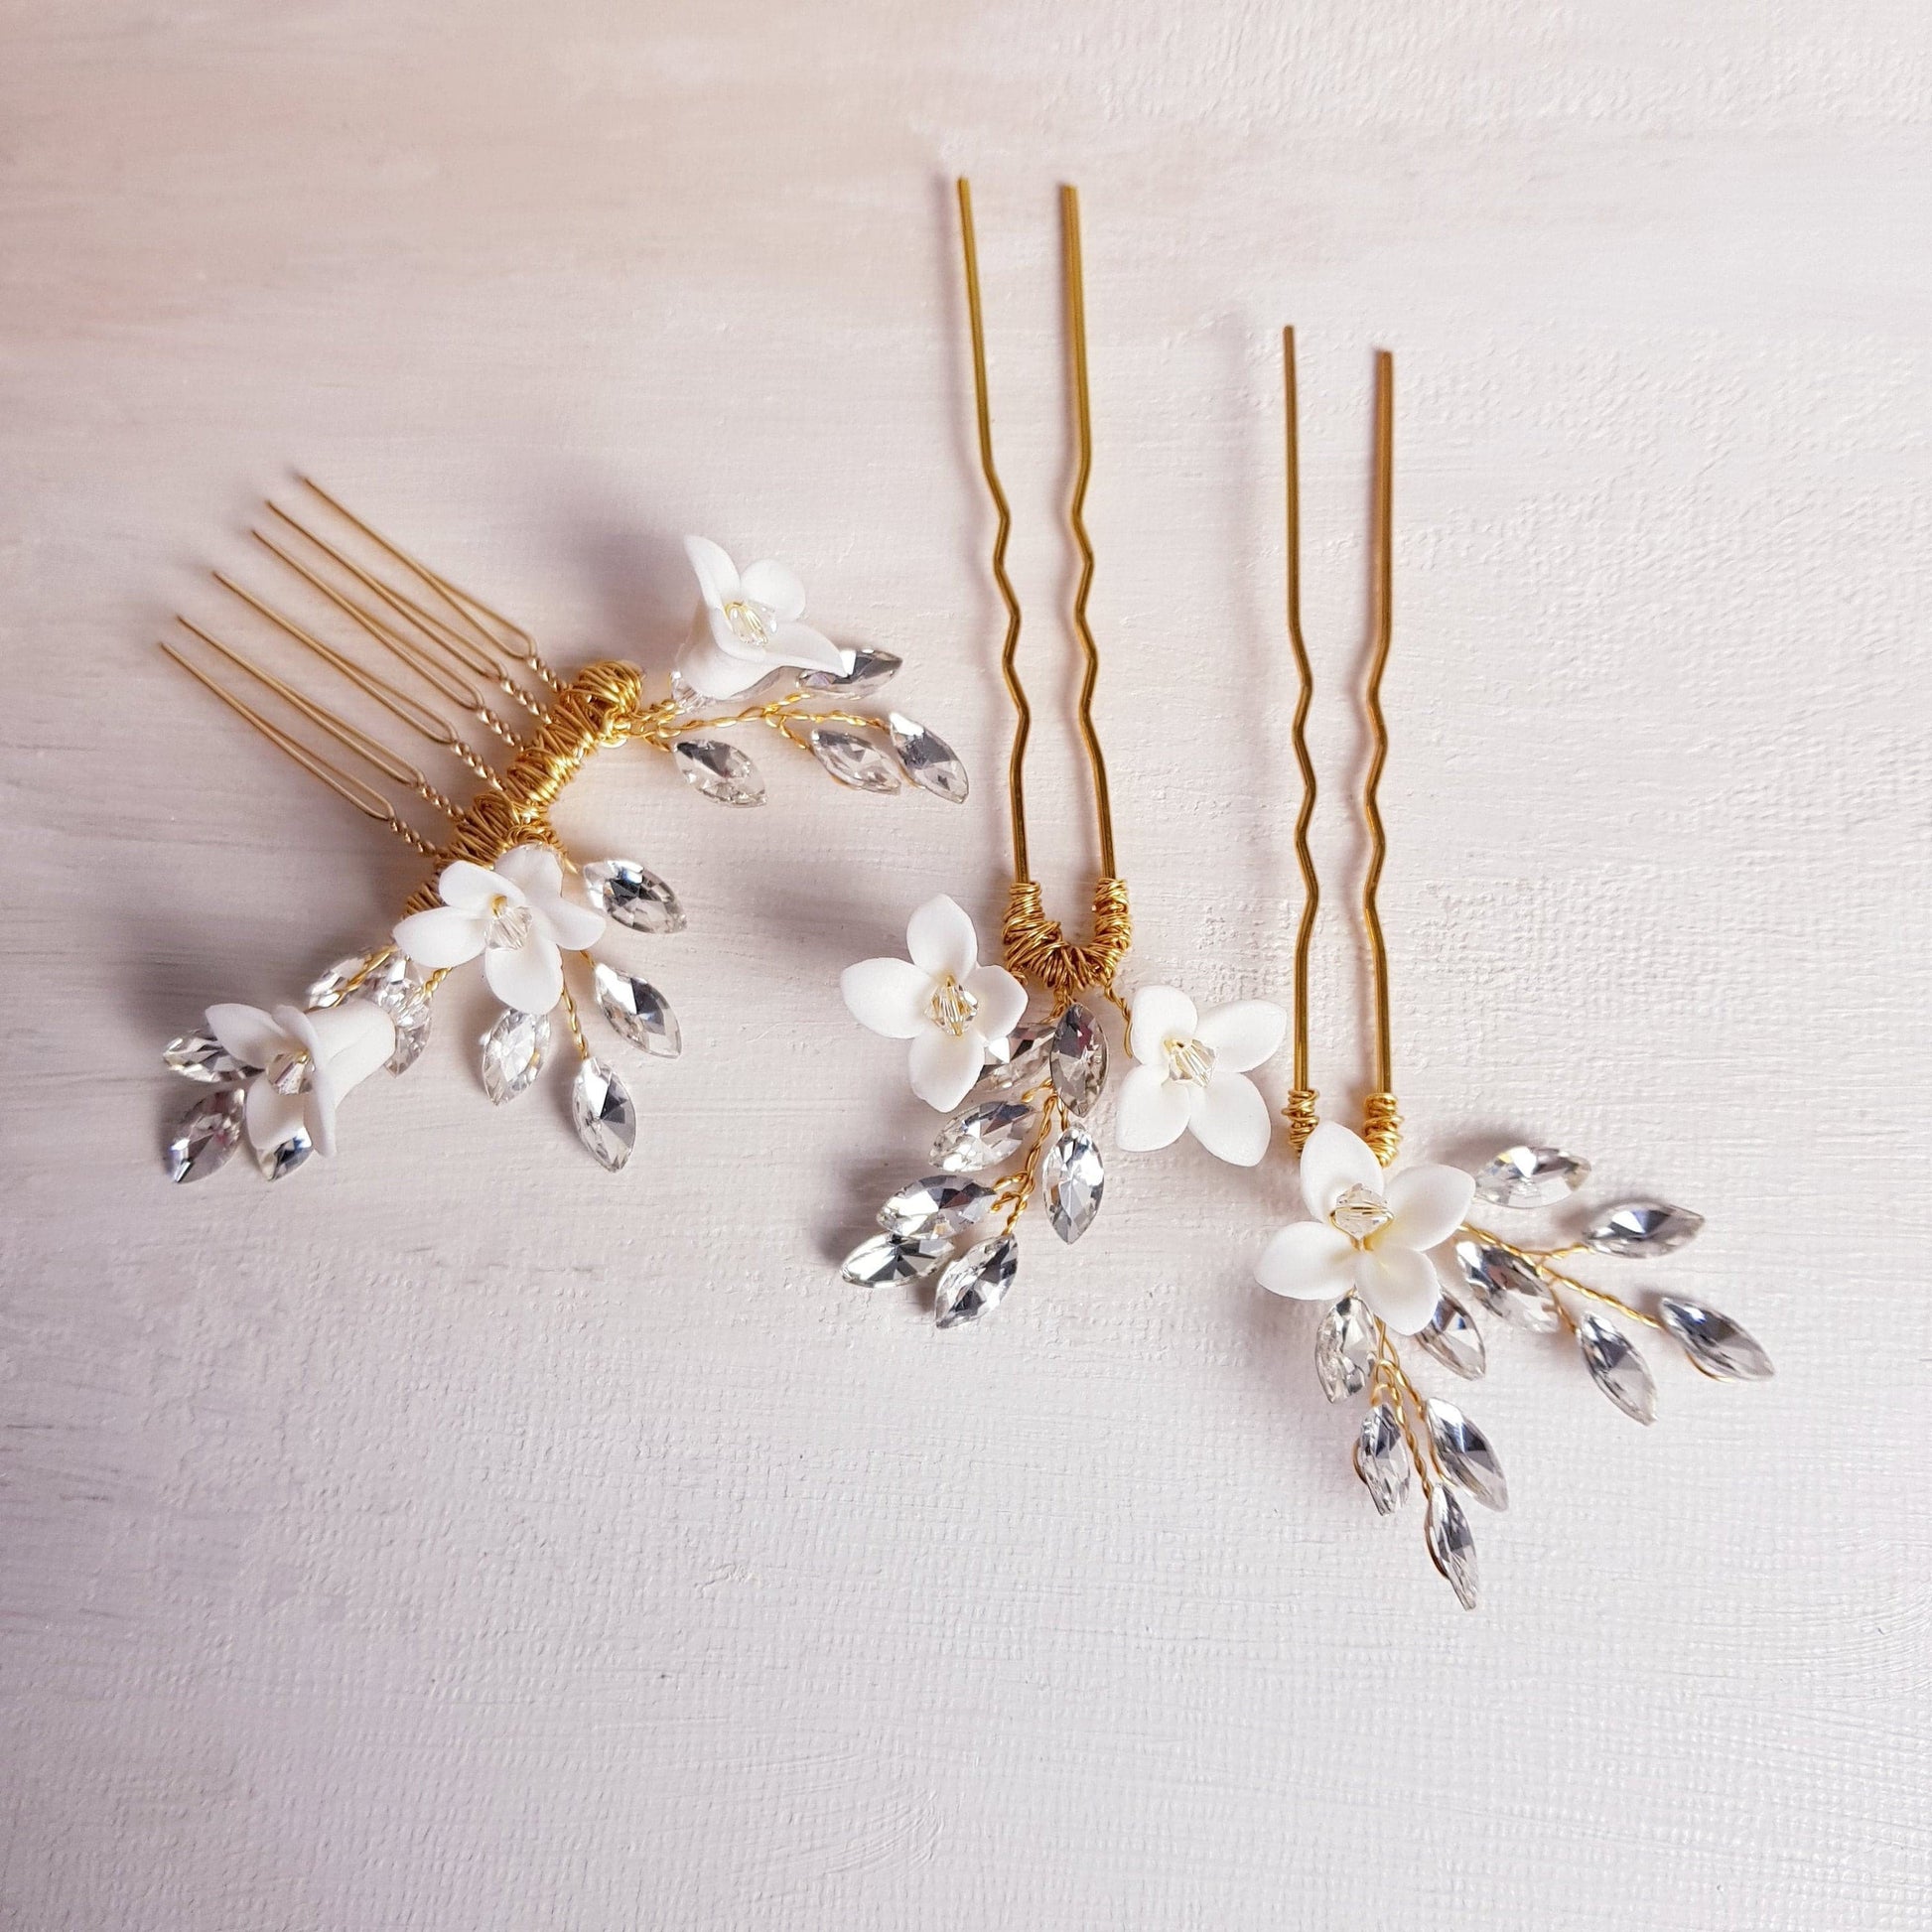 BOUTIQUEBYBRENDALEE FEUILLES BLING Haircomb hairpins small white porcelain flowers Hair Pin Headpiece Accessory gold comb hair forks picks